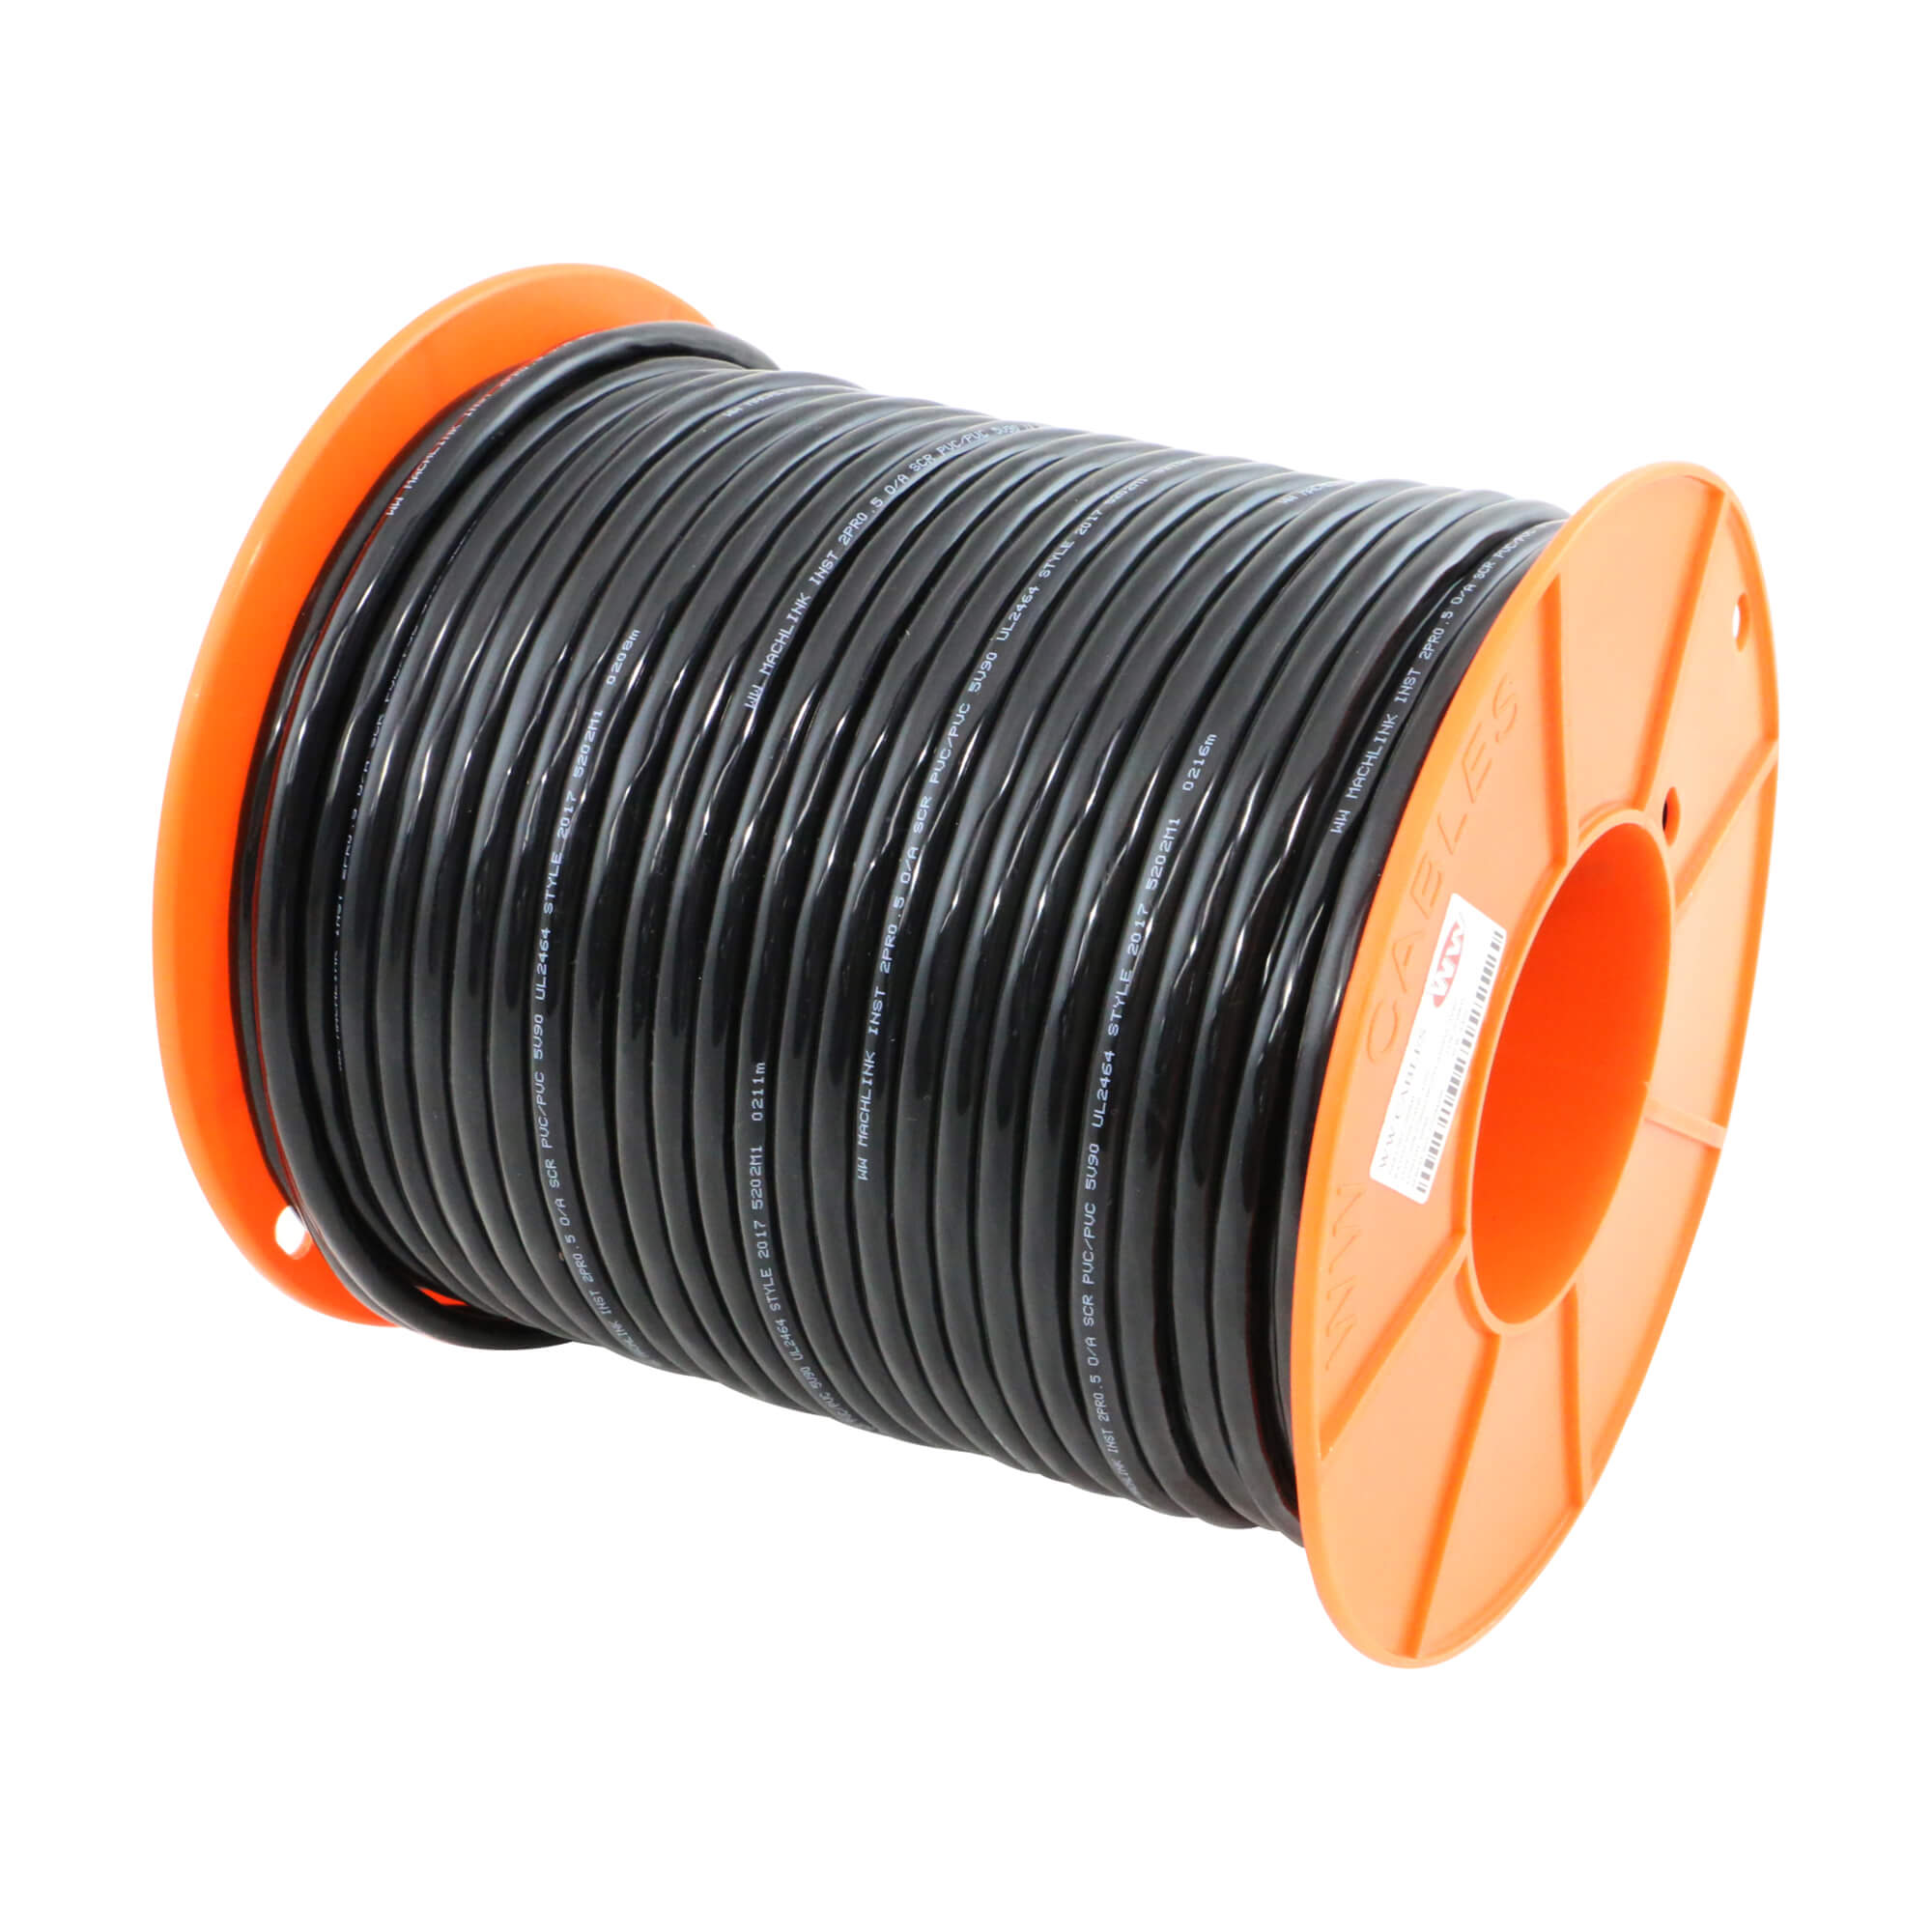 0.5 mm 1 Pair 7/030 Screened Cable 100 m roll